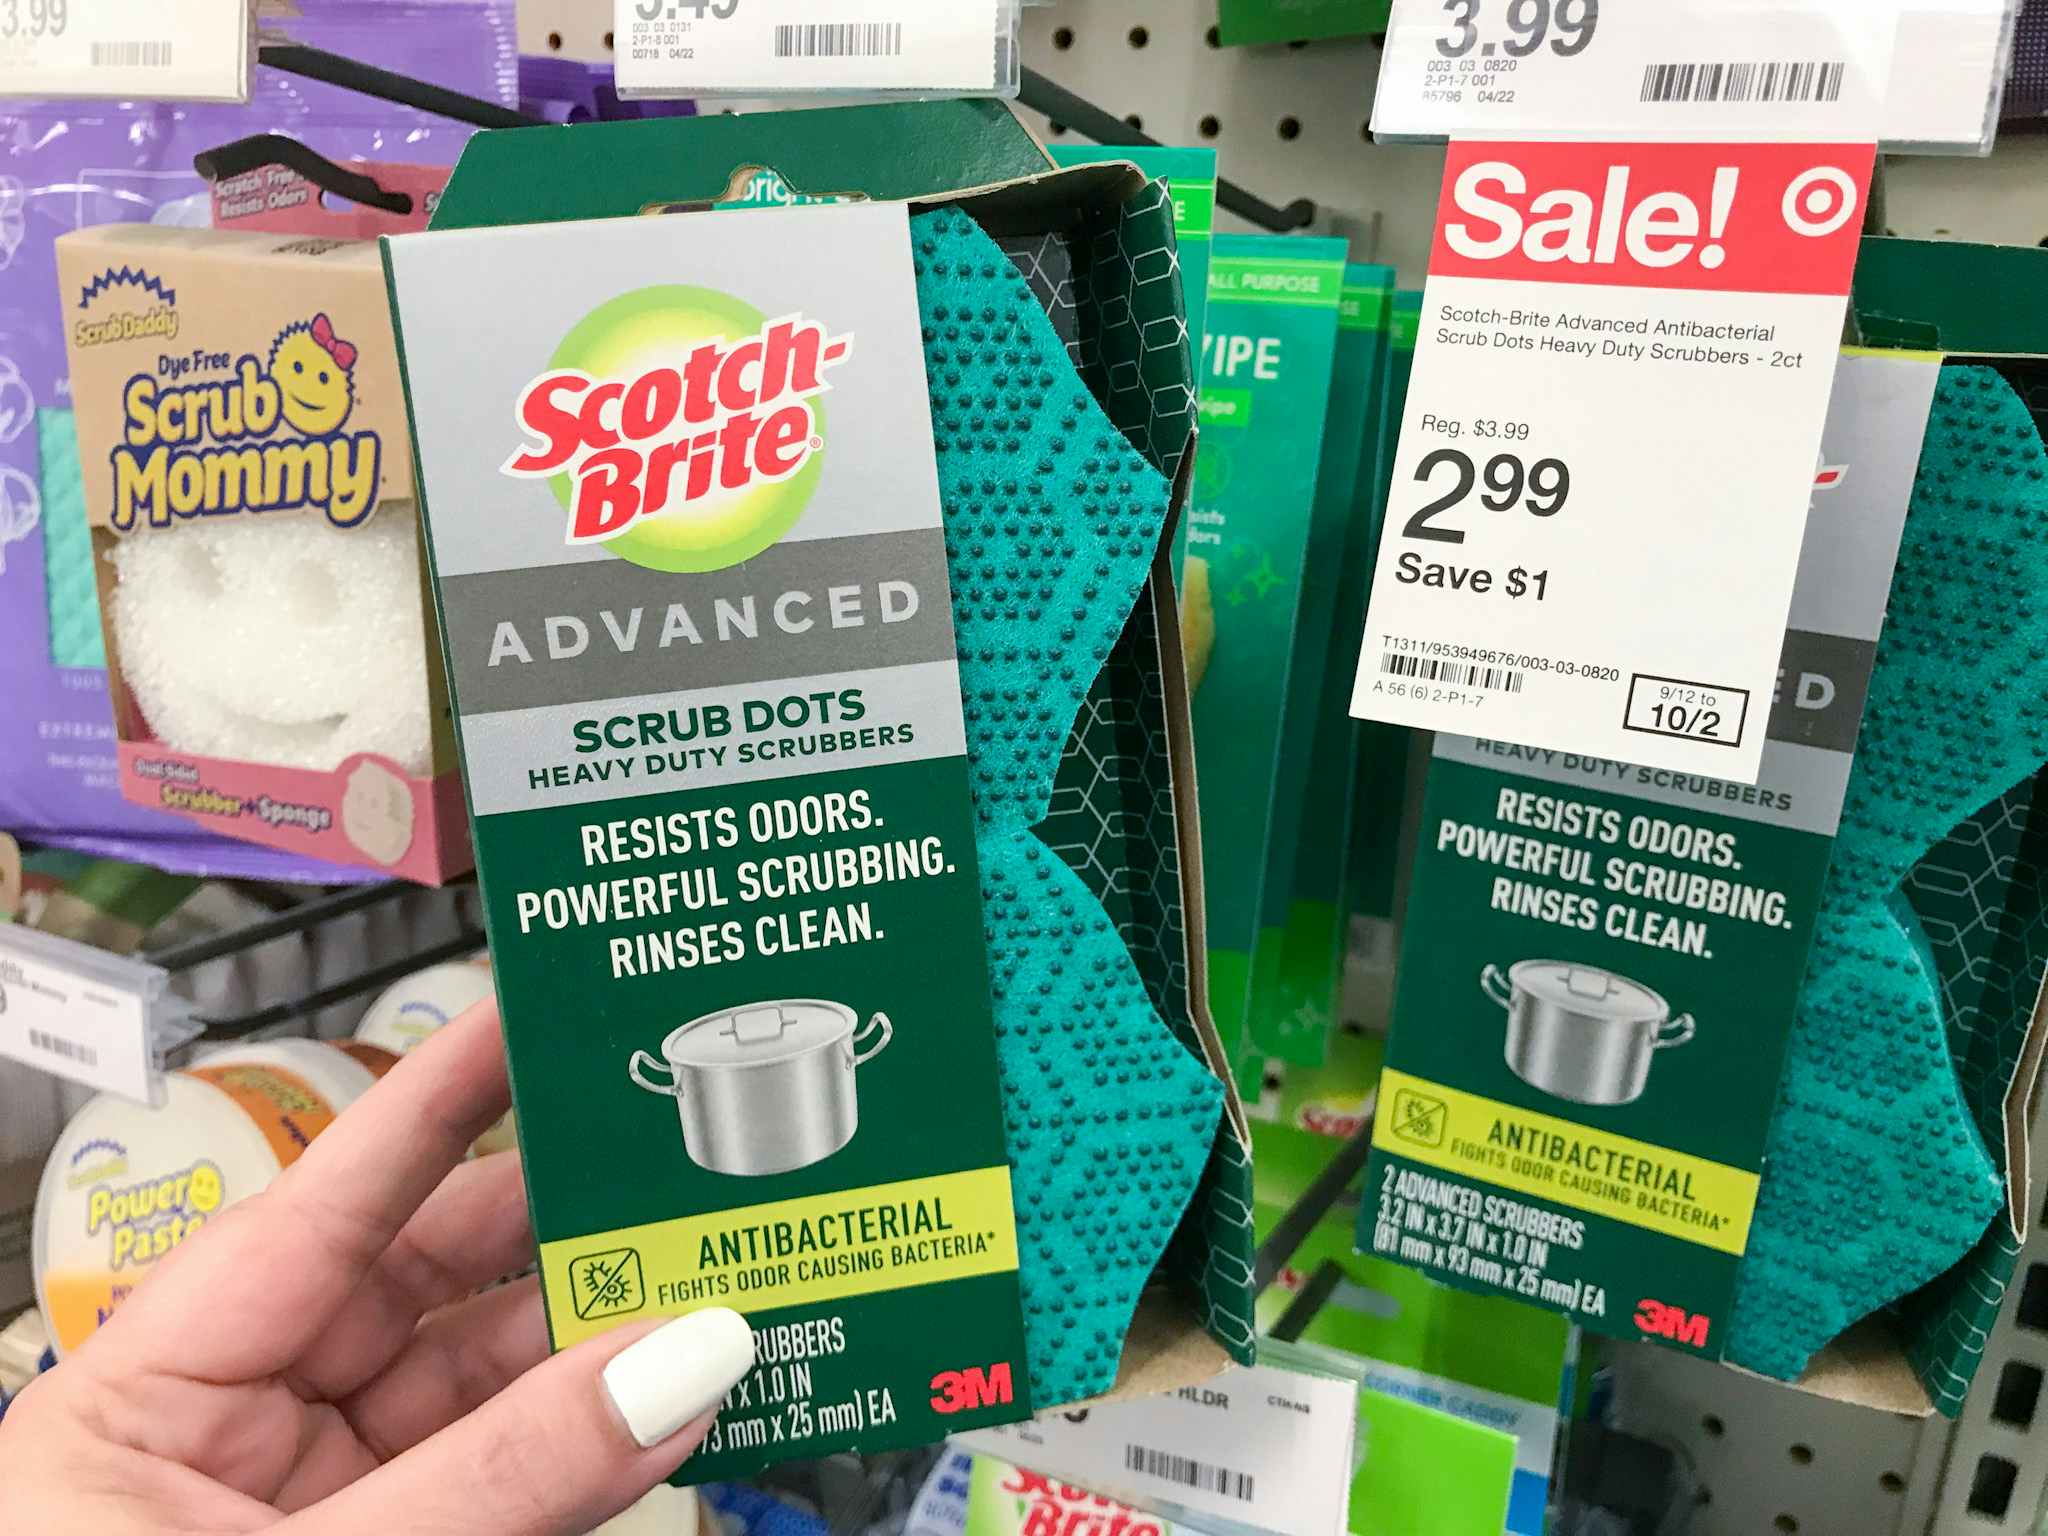 hand holding scotch-brite advanced scrub dots in front of target sale tag